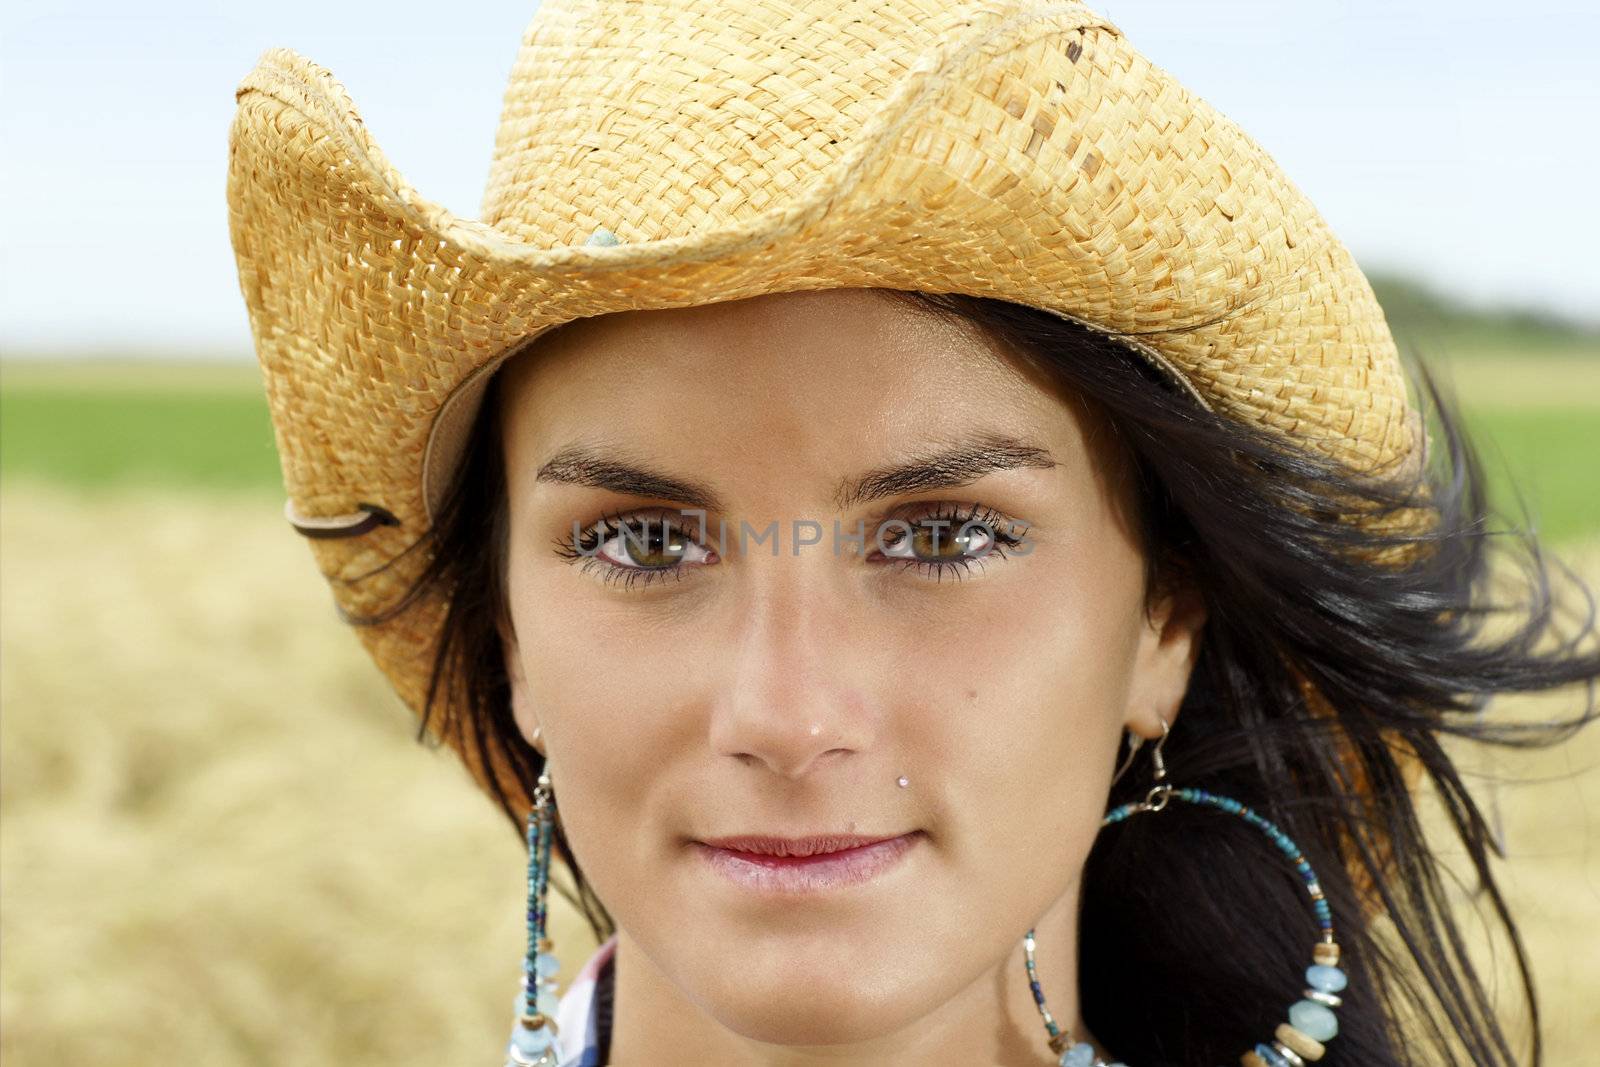 Portrait of cowgirl with hint of a smile by Mirage3